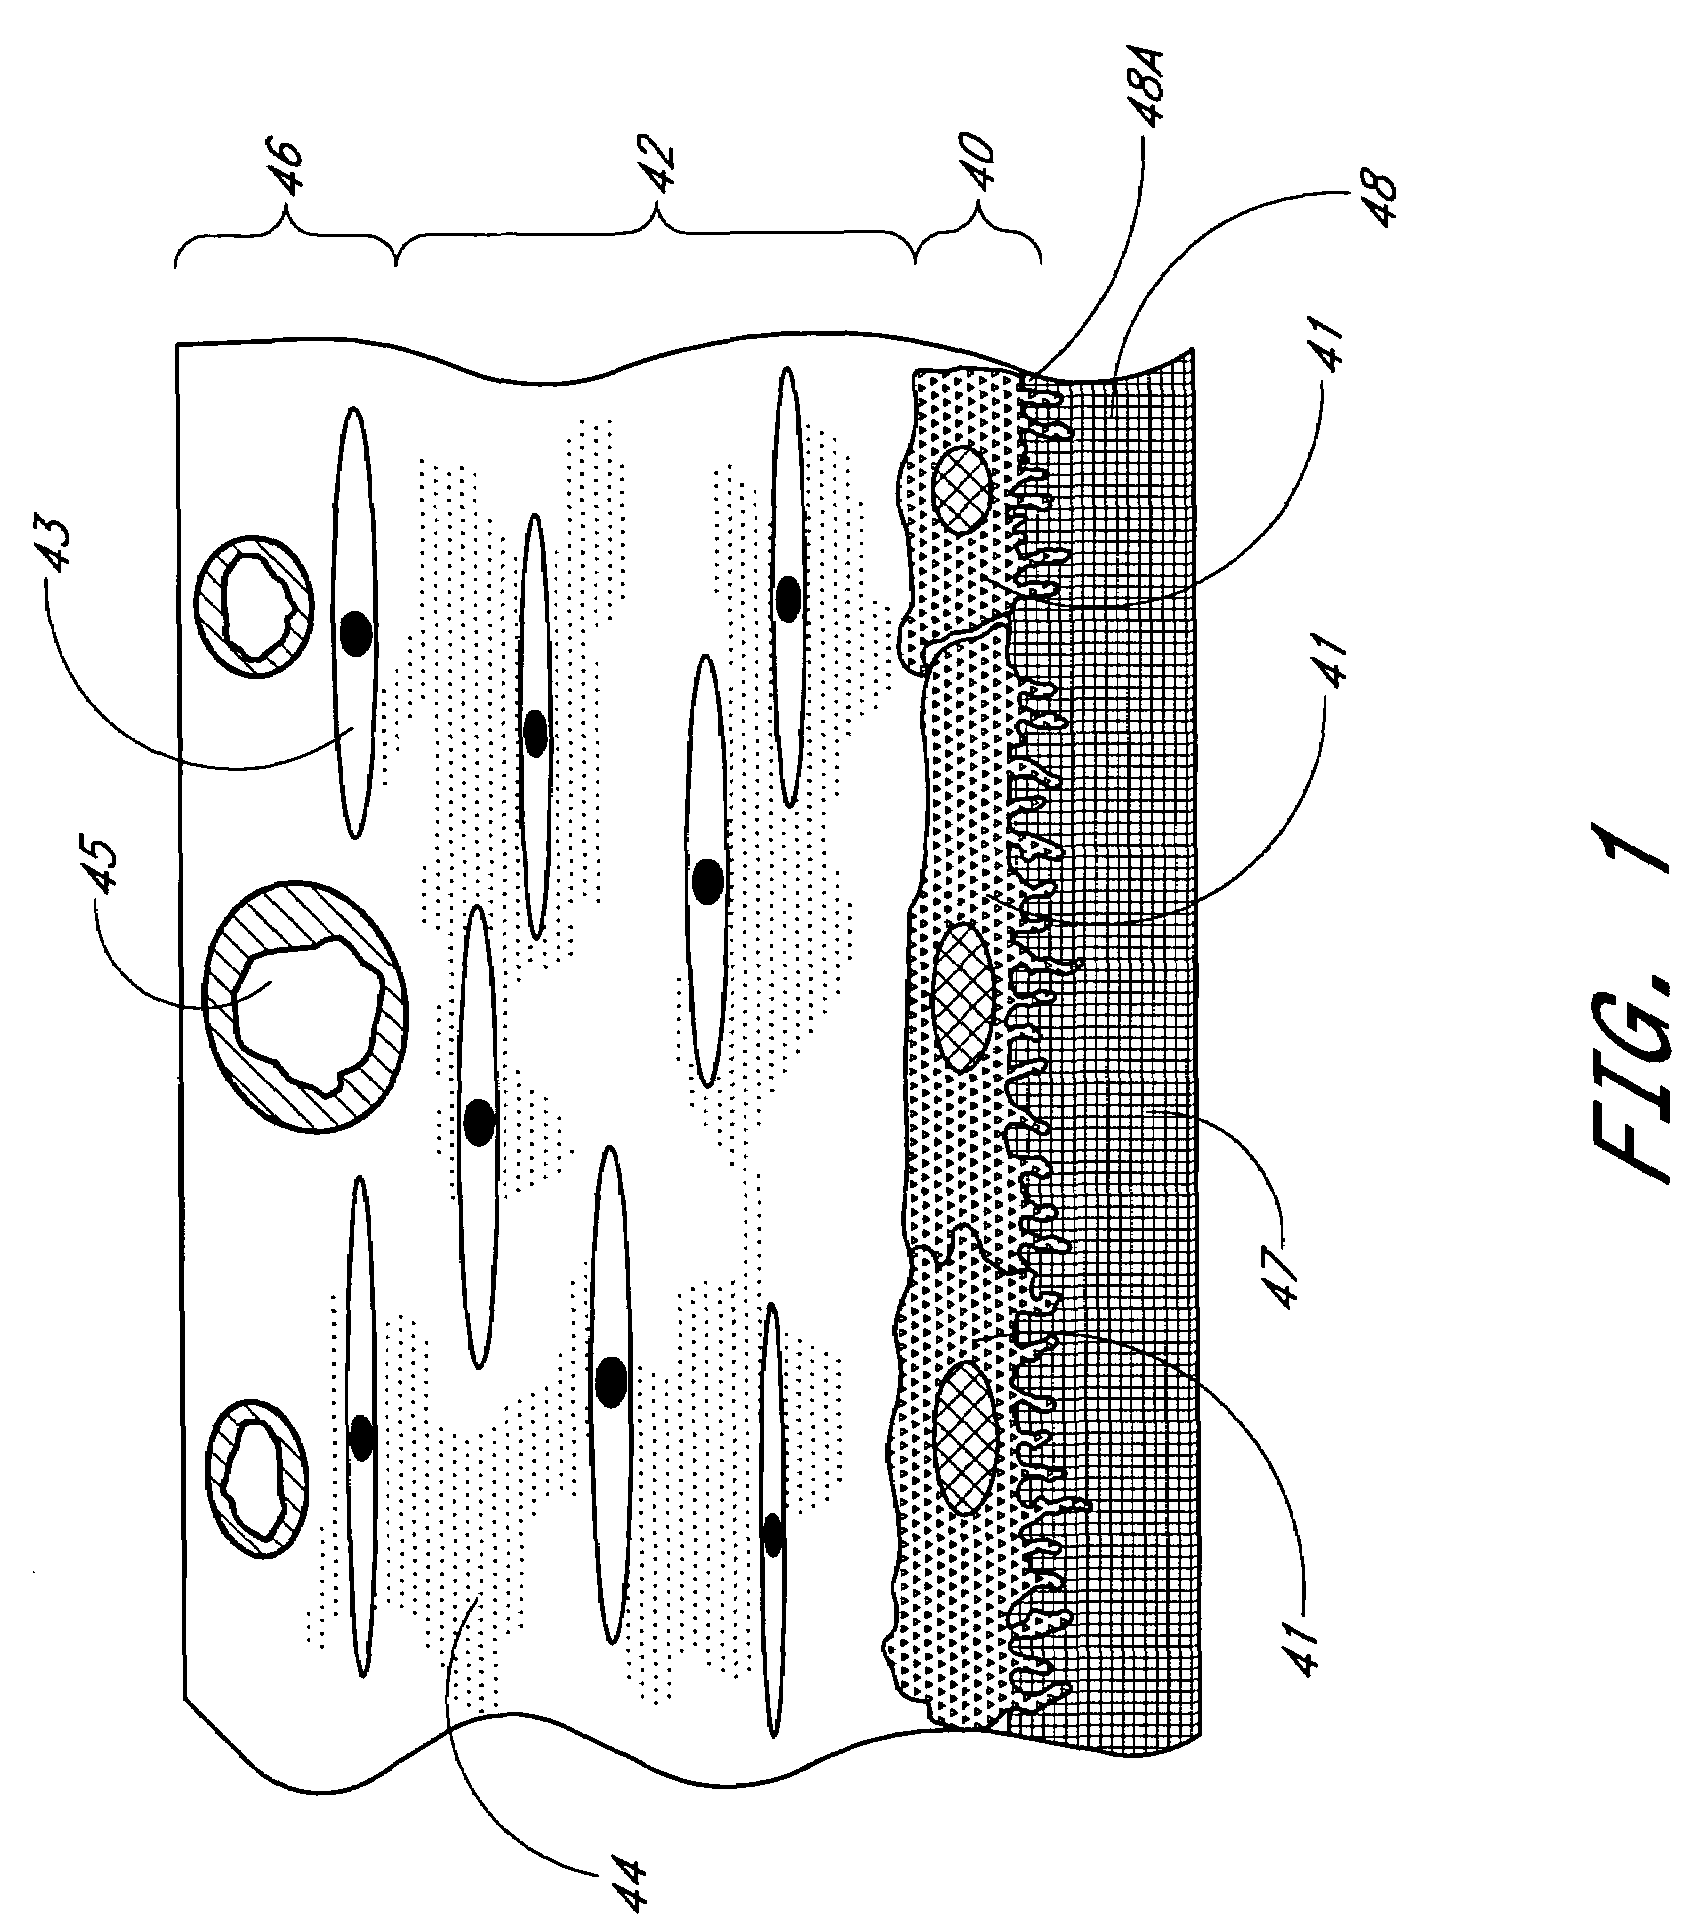 Membrane for use with implantable devices